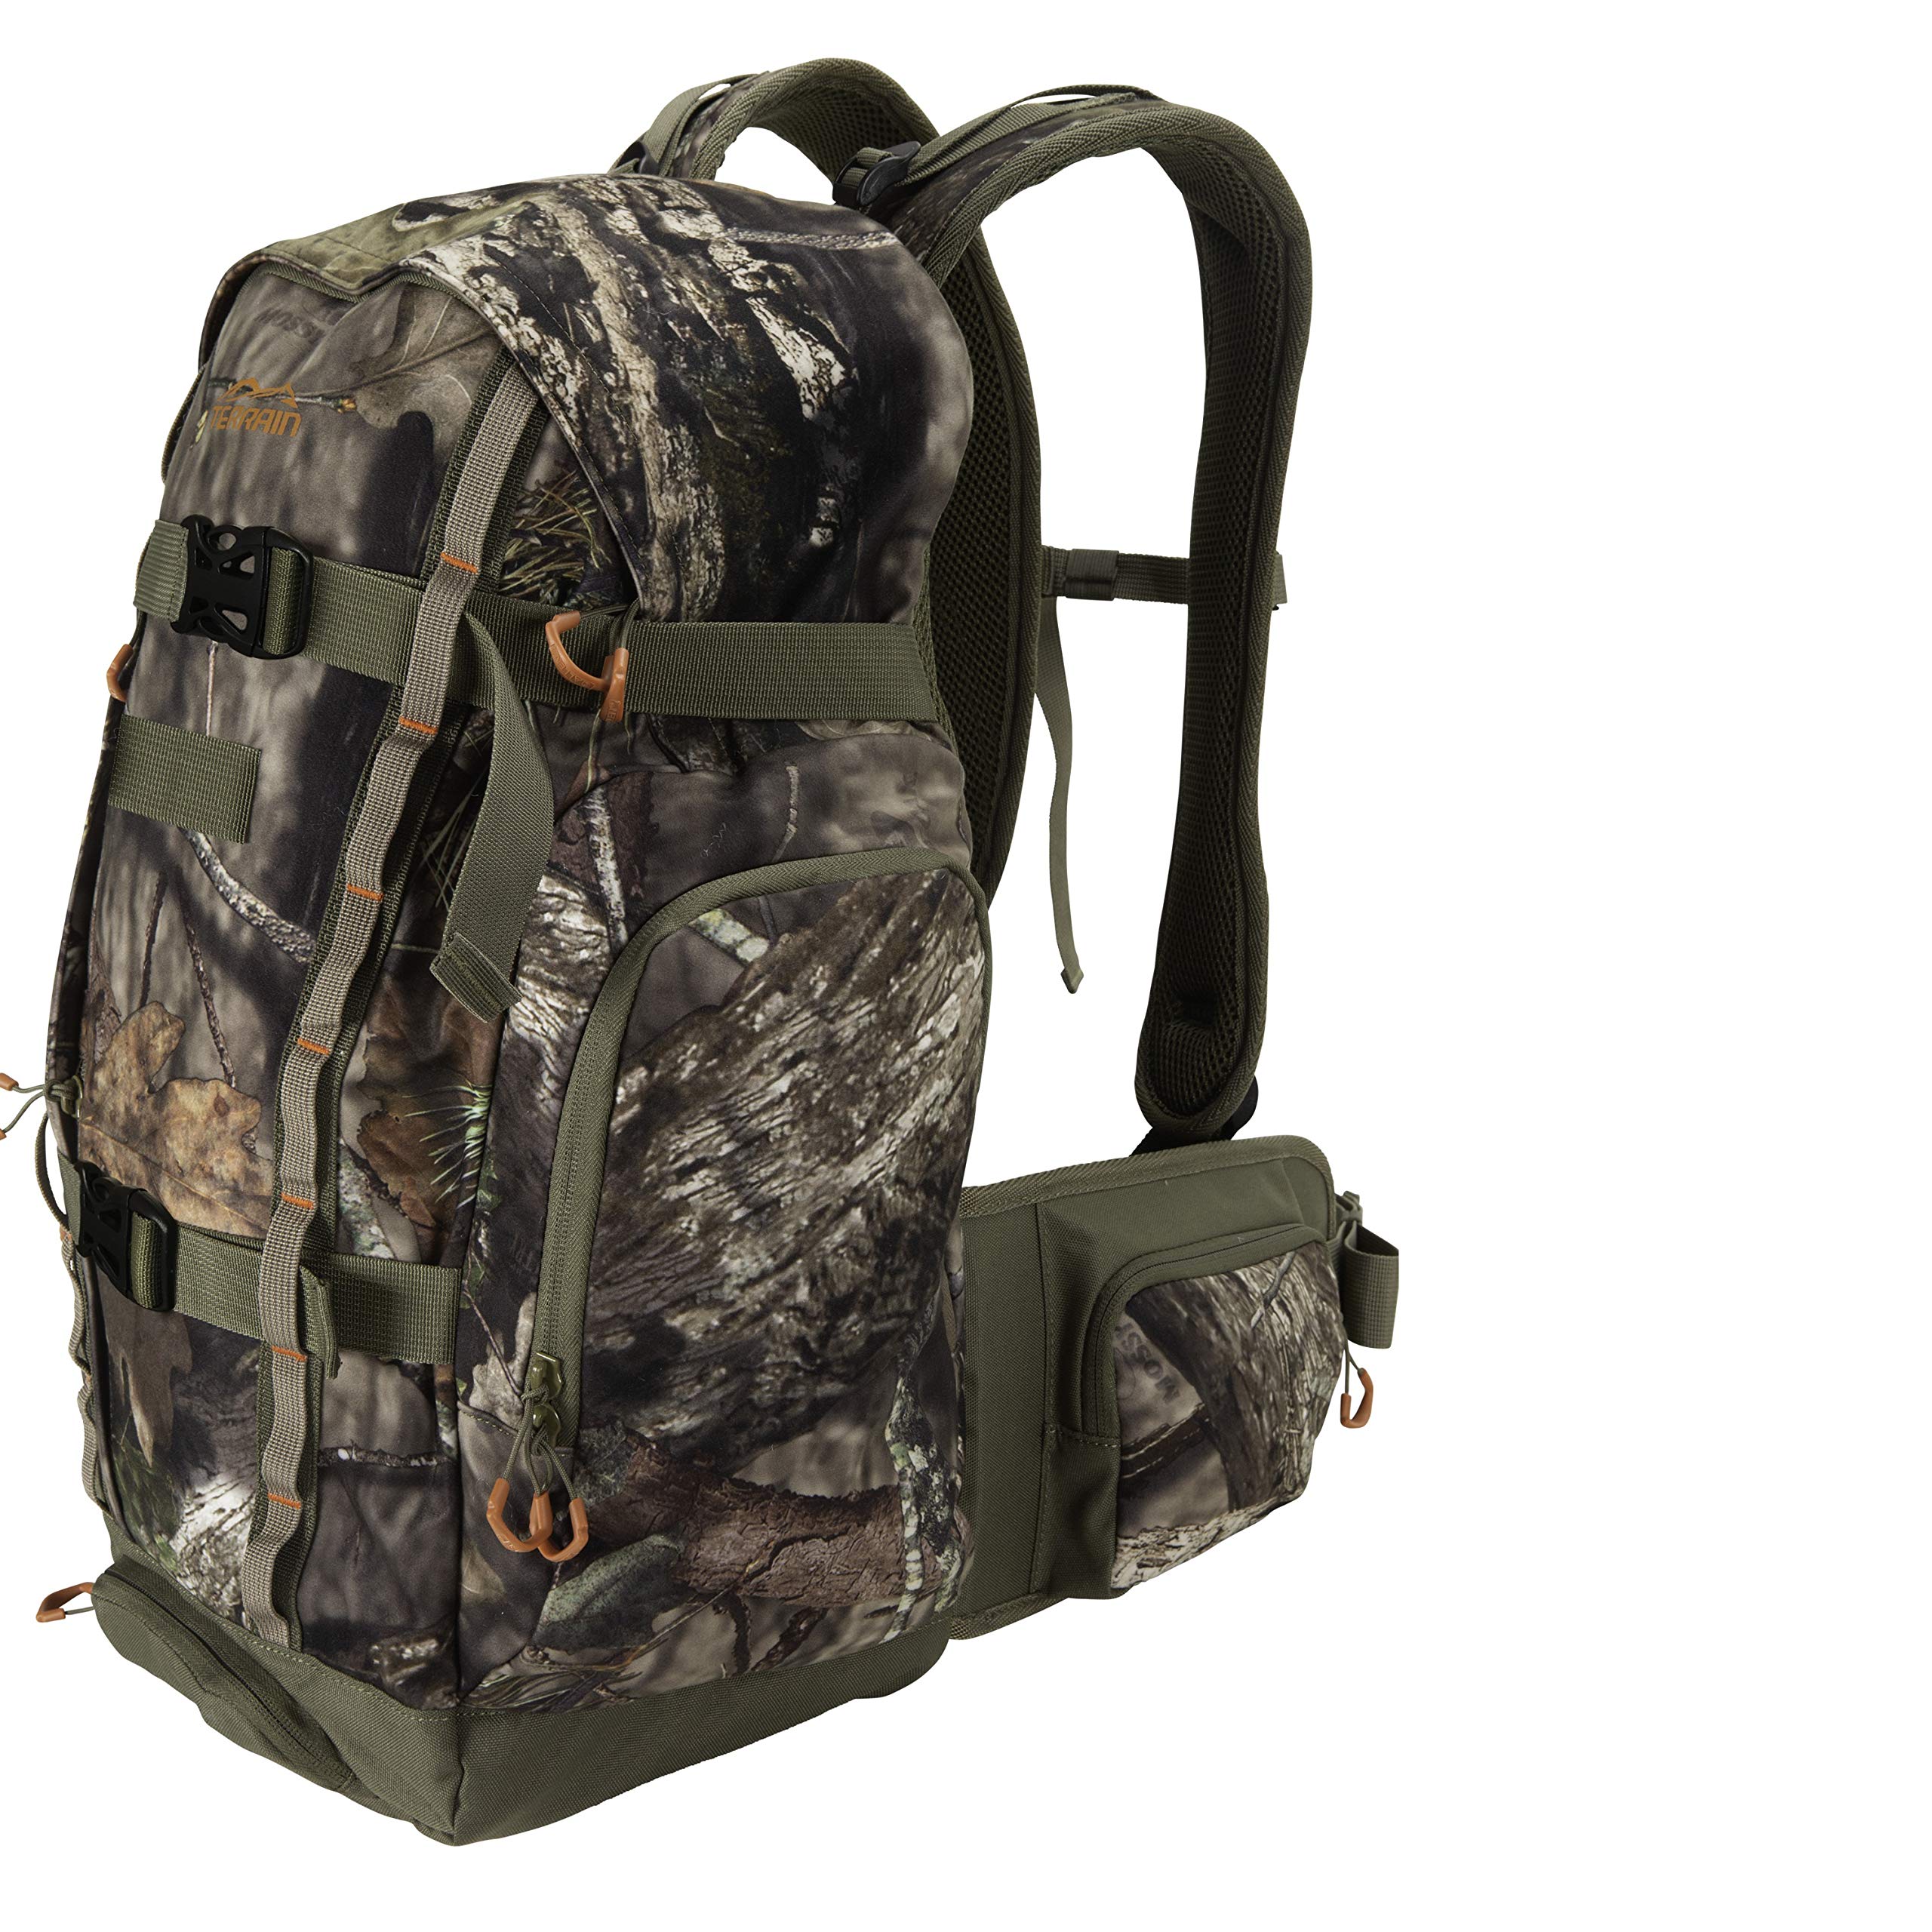 Allen Company unisex adult Knoll Terrain 30L up Daypack, Olive and Mossy Oak Break-Up Country, One Size US